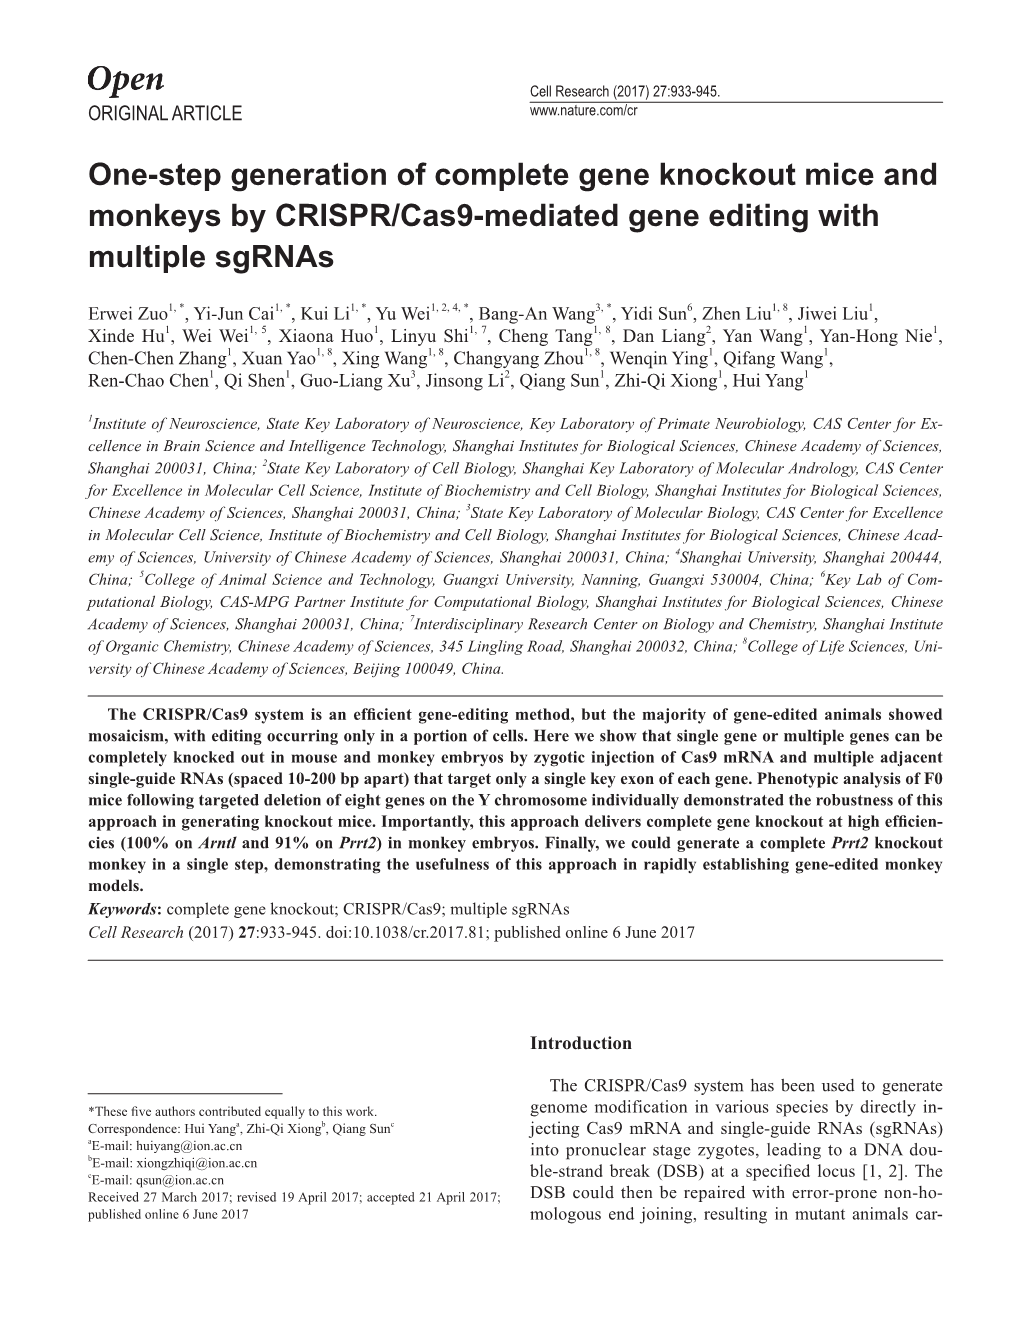 One-Step Generation of Complete Gene Knockout Mice and Monkeys by CRISPR/Cas9-Mediated Gene Editing with Multiple Sgrnas